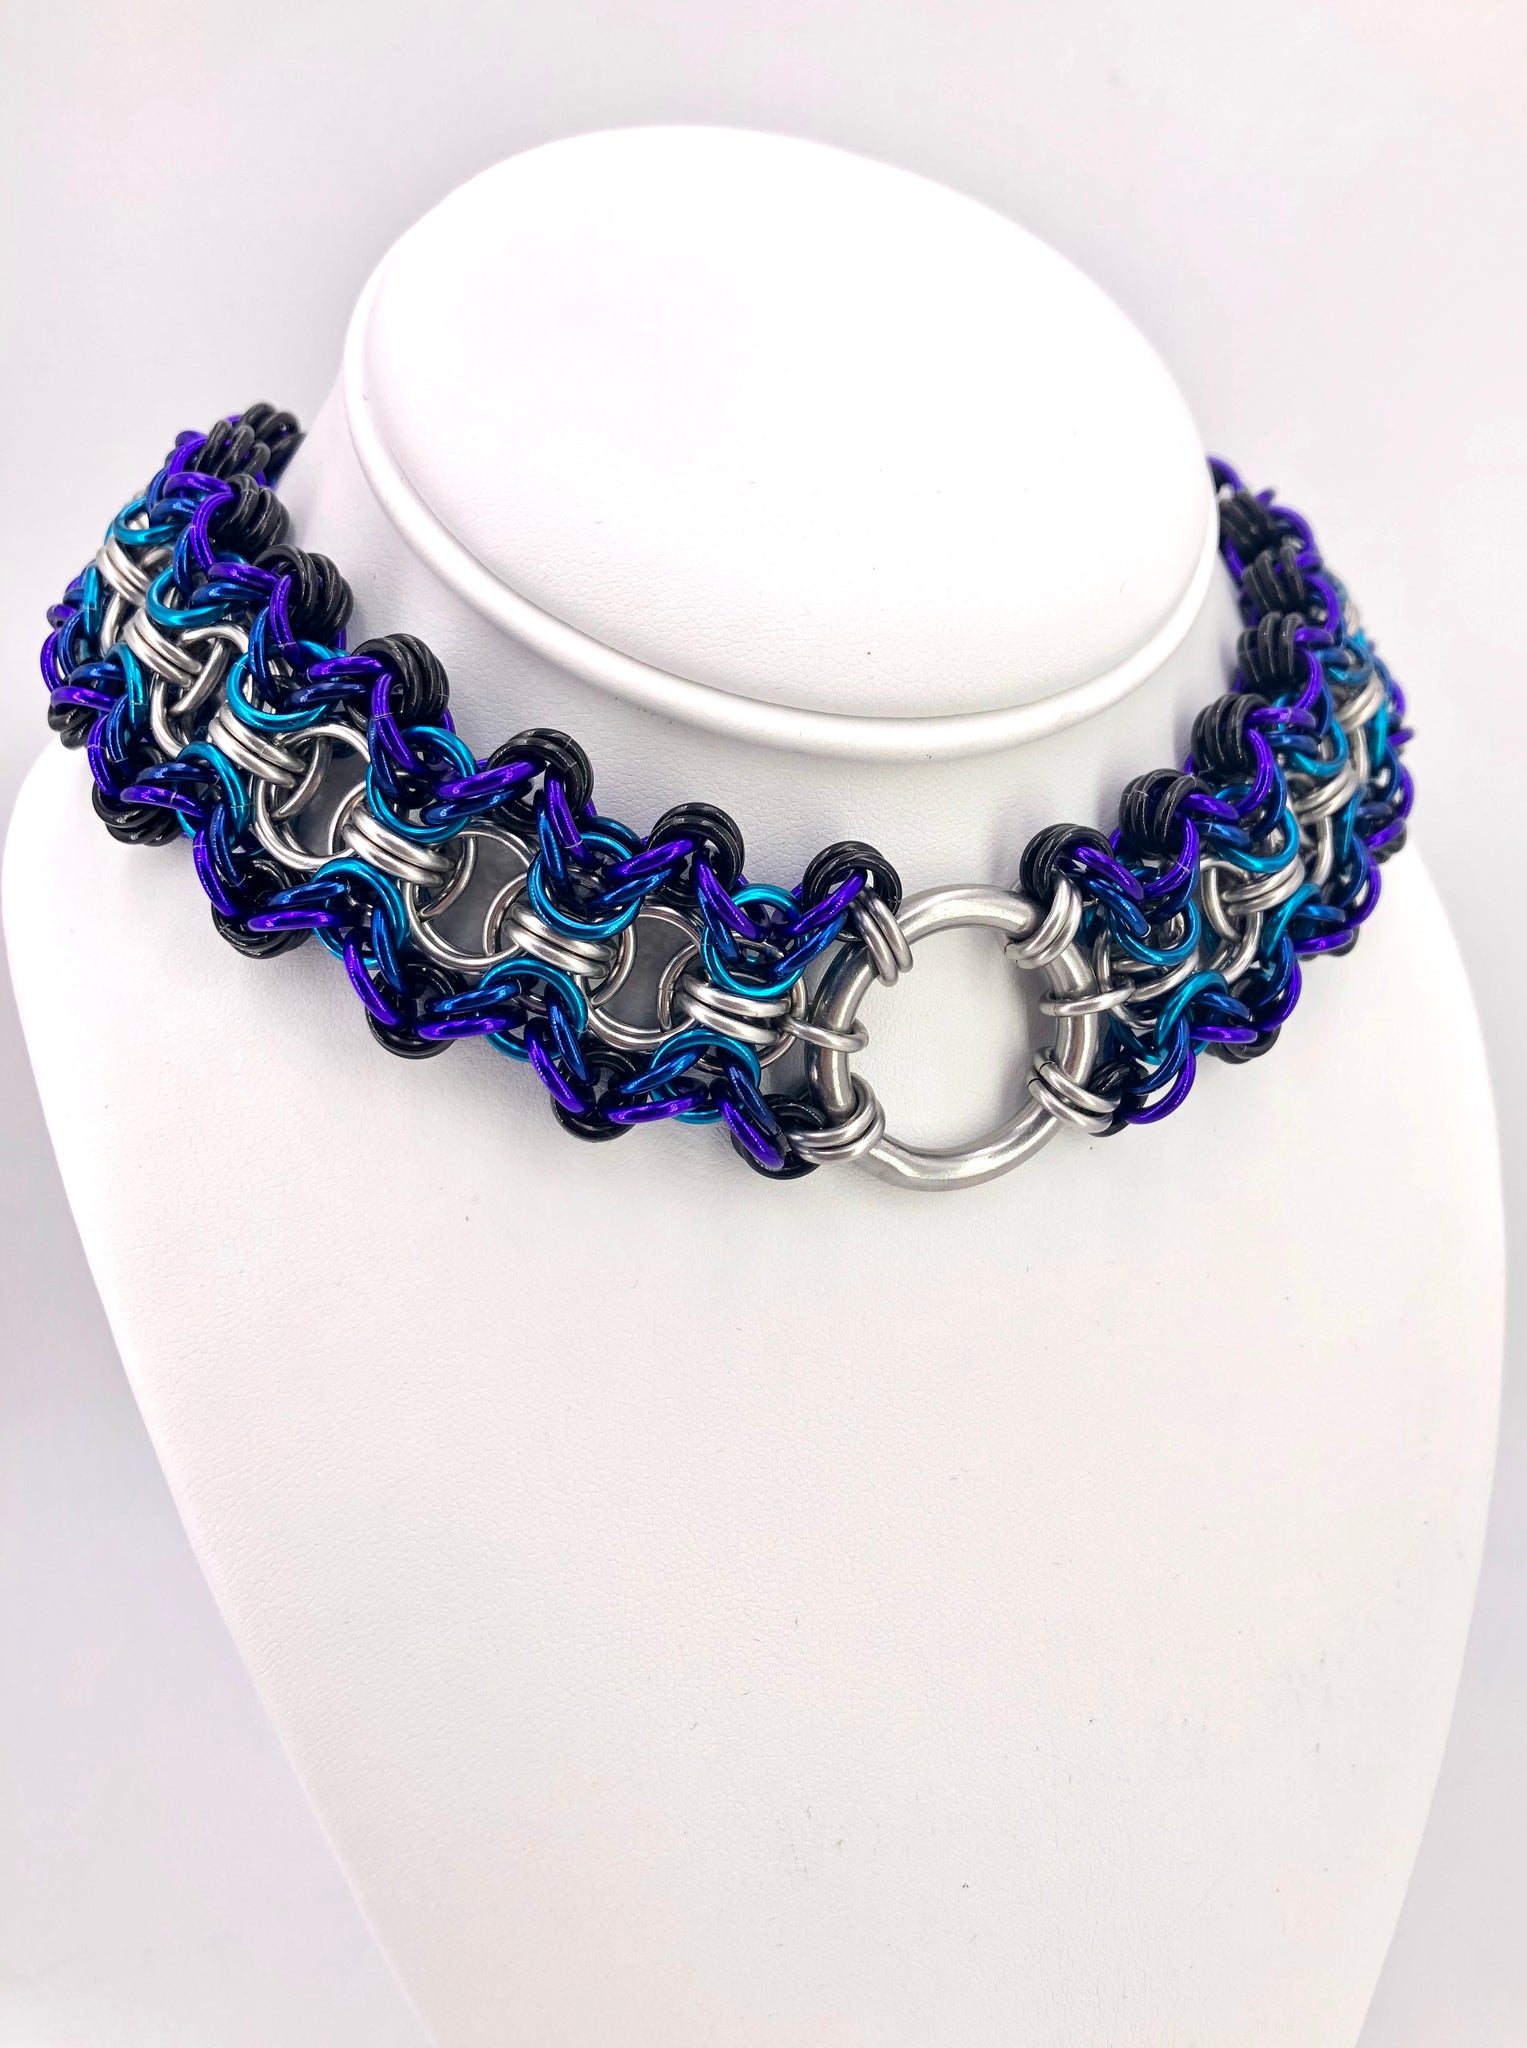 Blue, Purple, and Black BDSM Collar with Center Ring